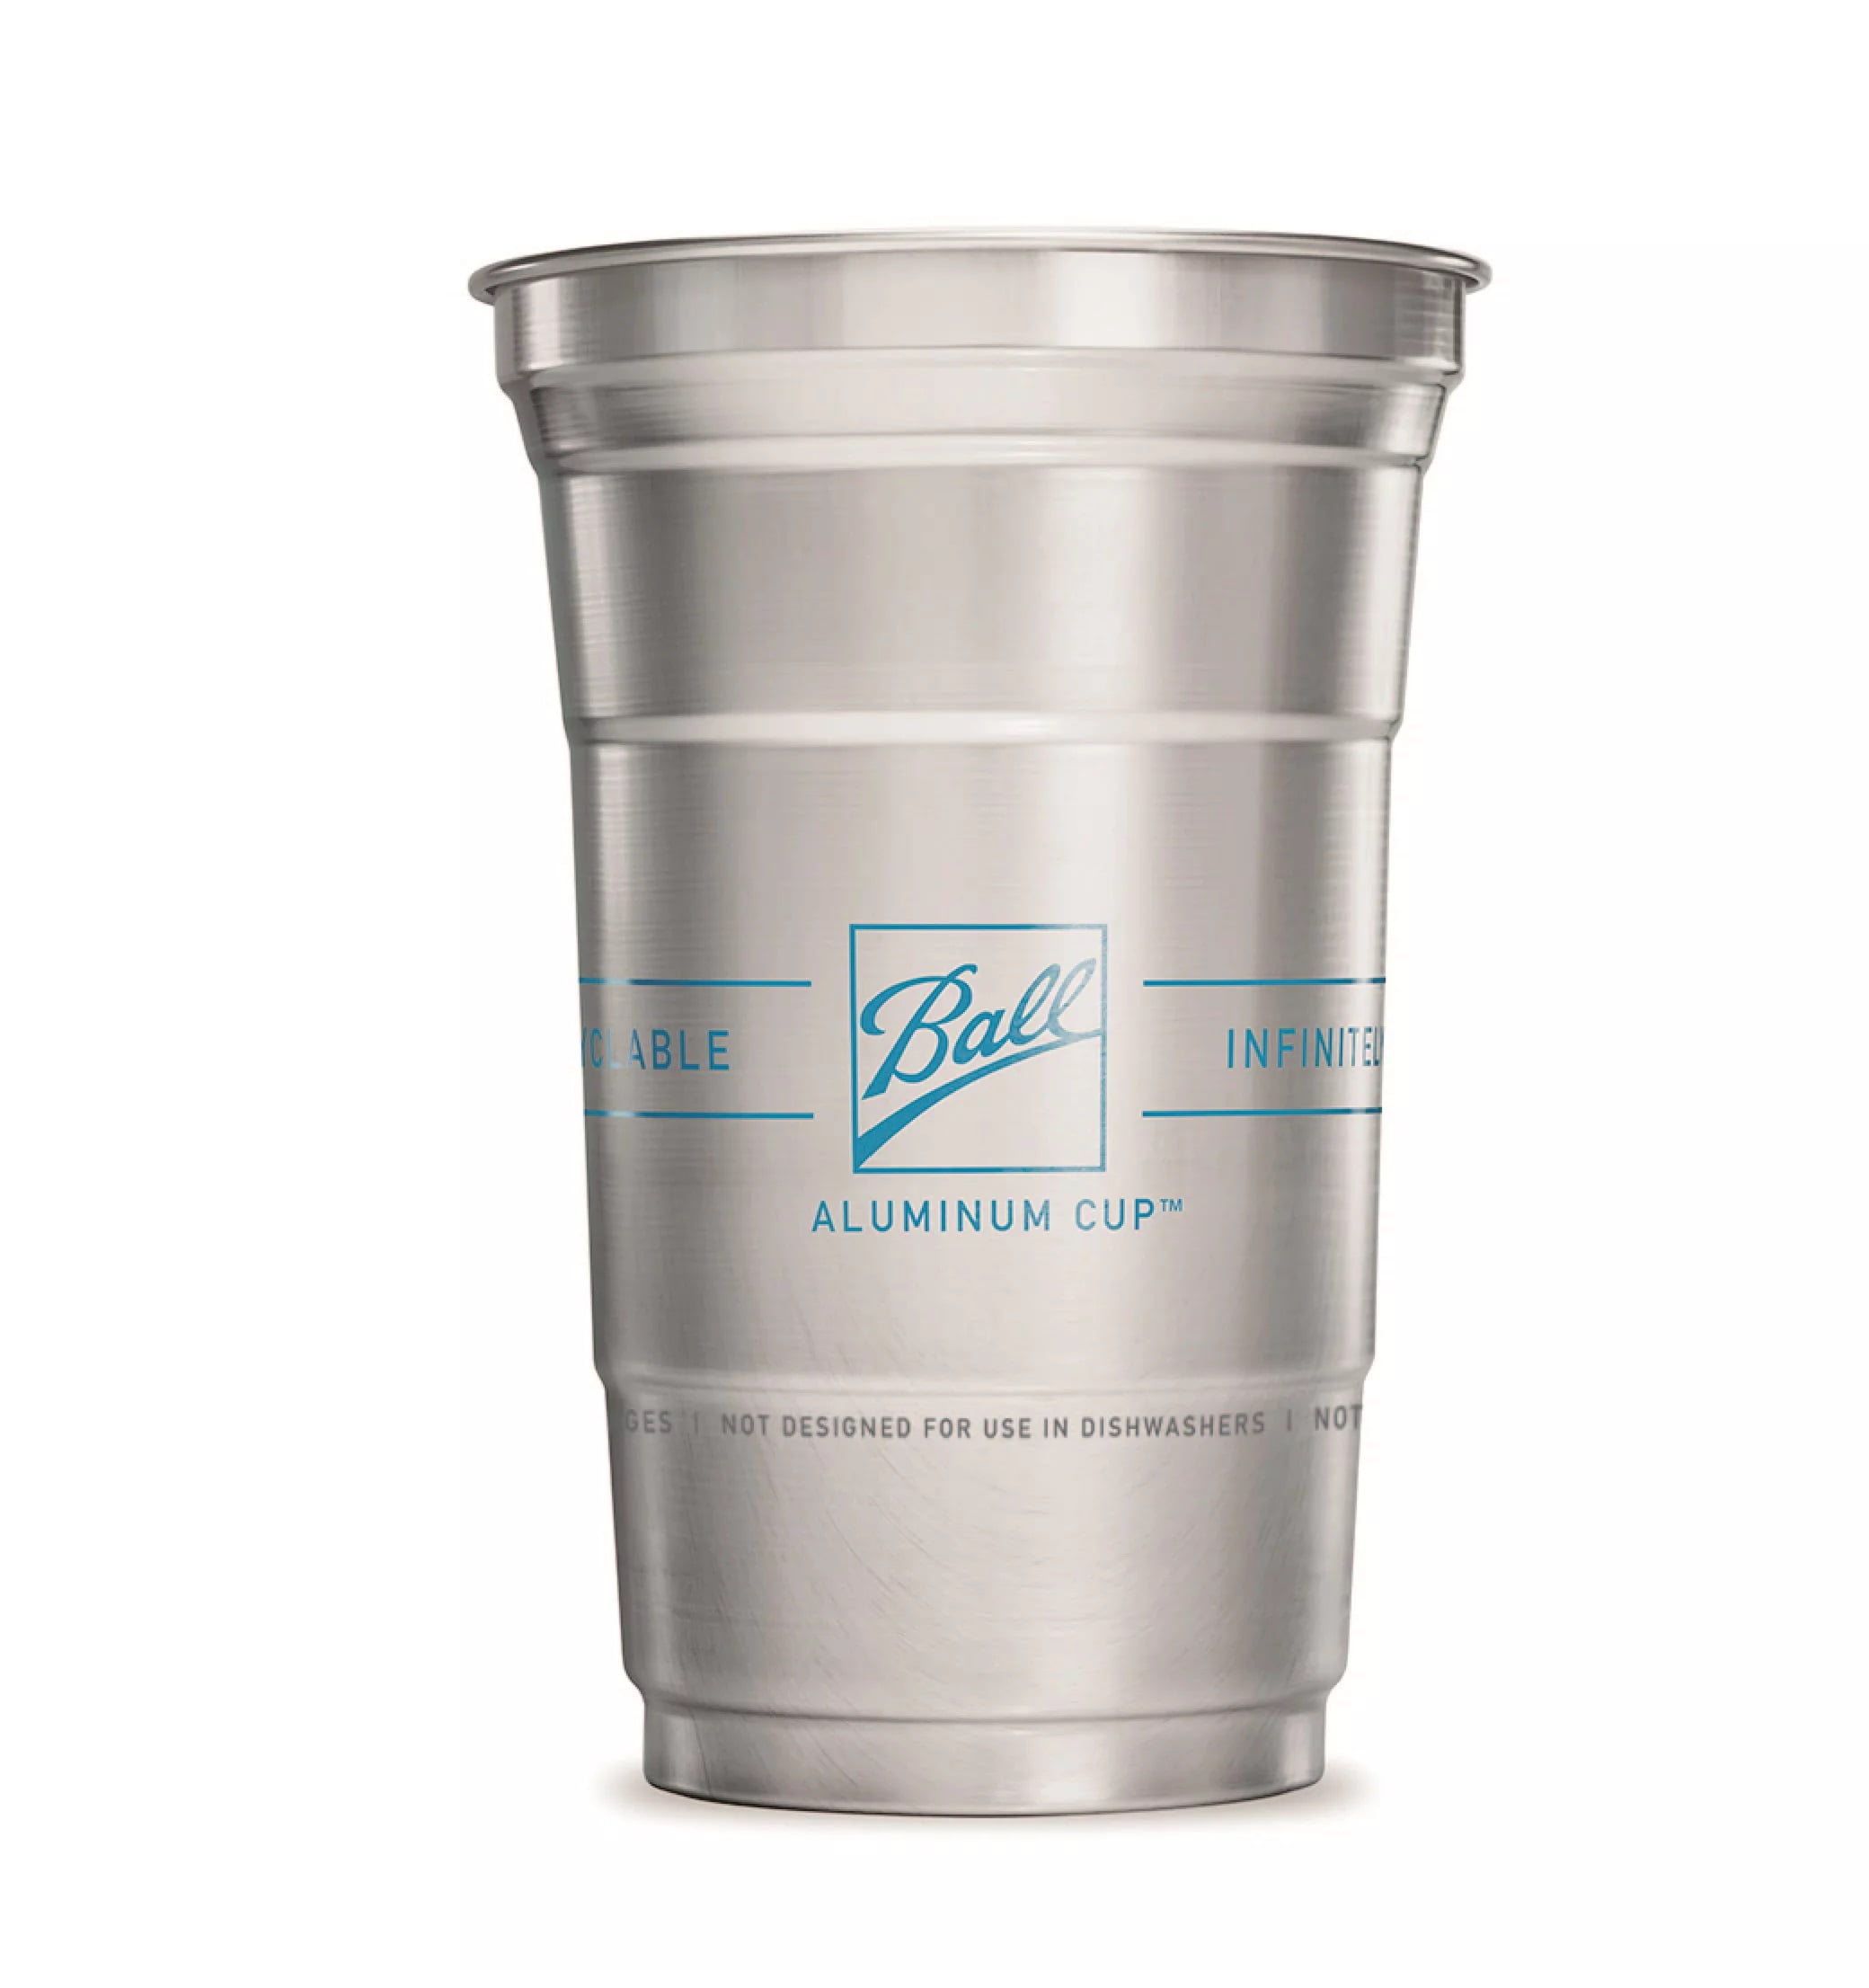 Ball Aluminum Cup® on X: Win a Ball Aluminum Cup $1000 Party Pack